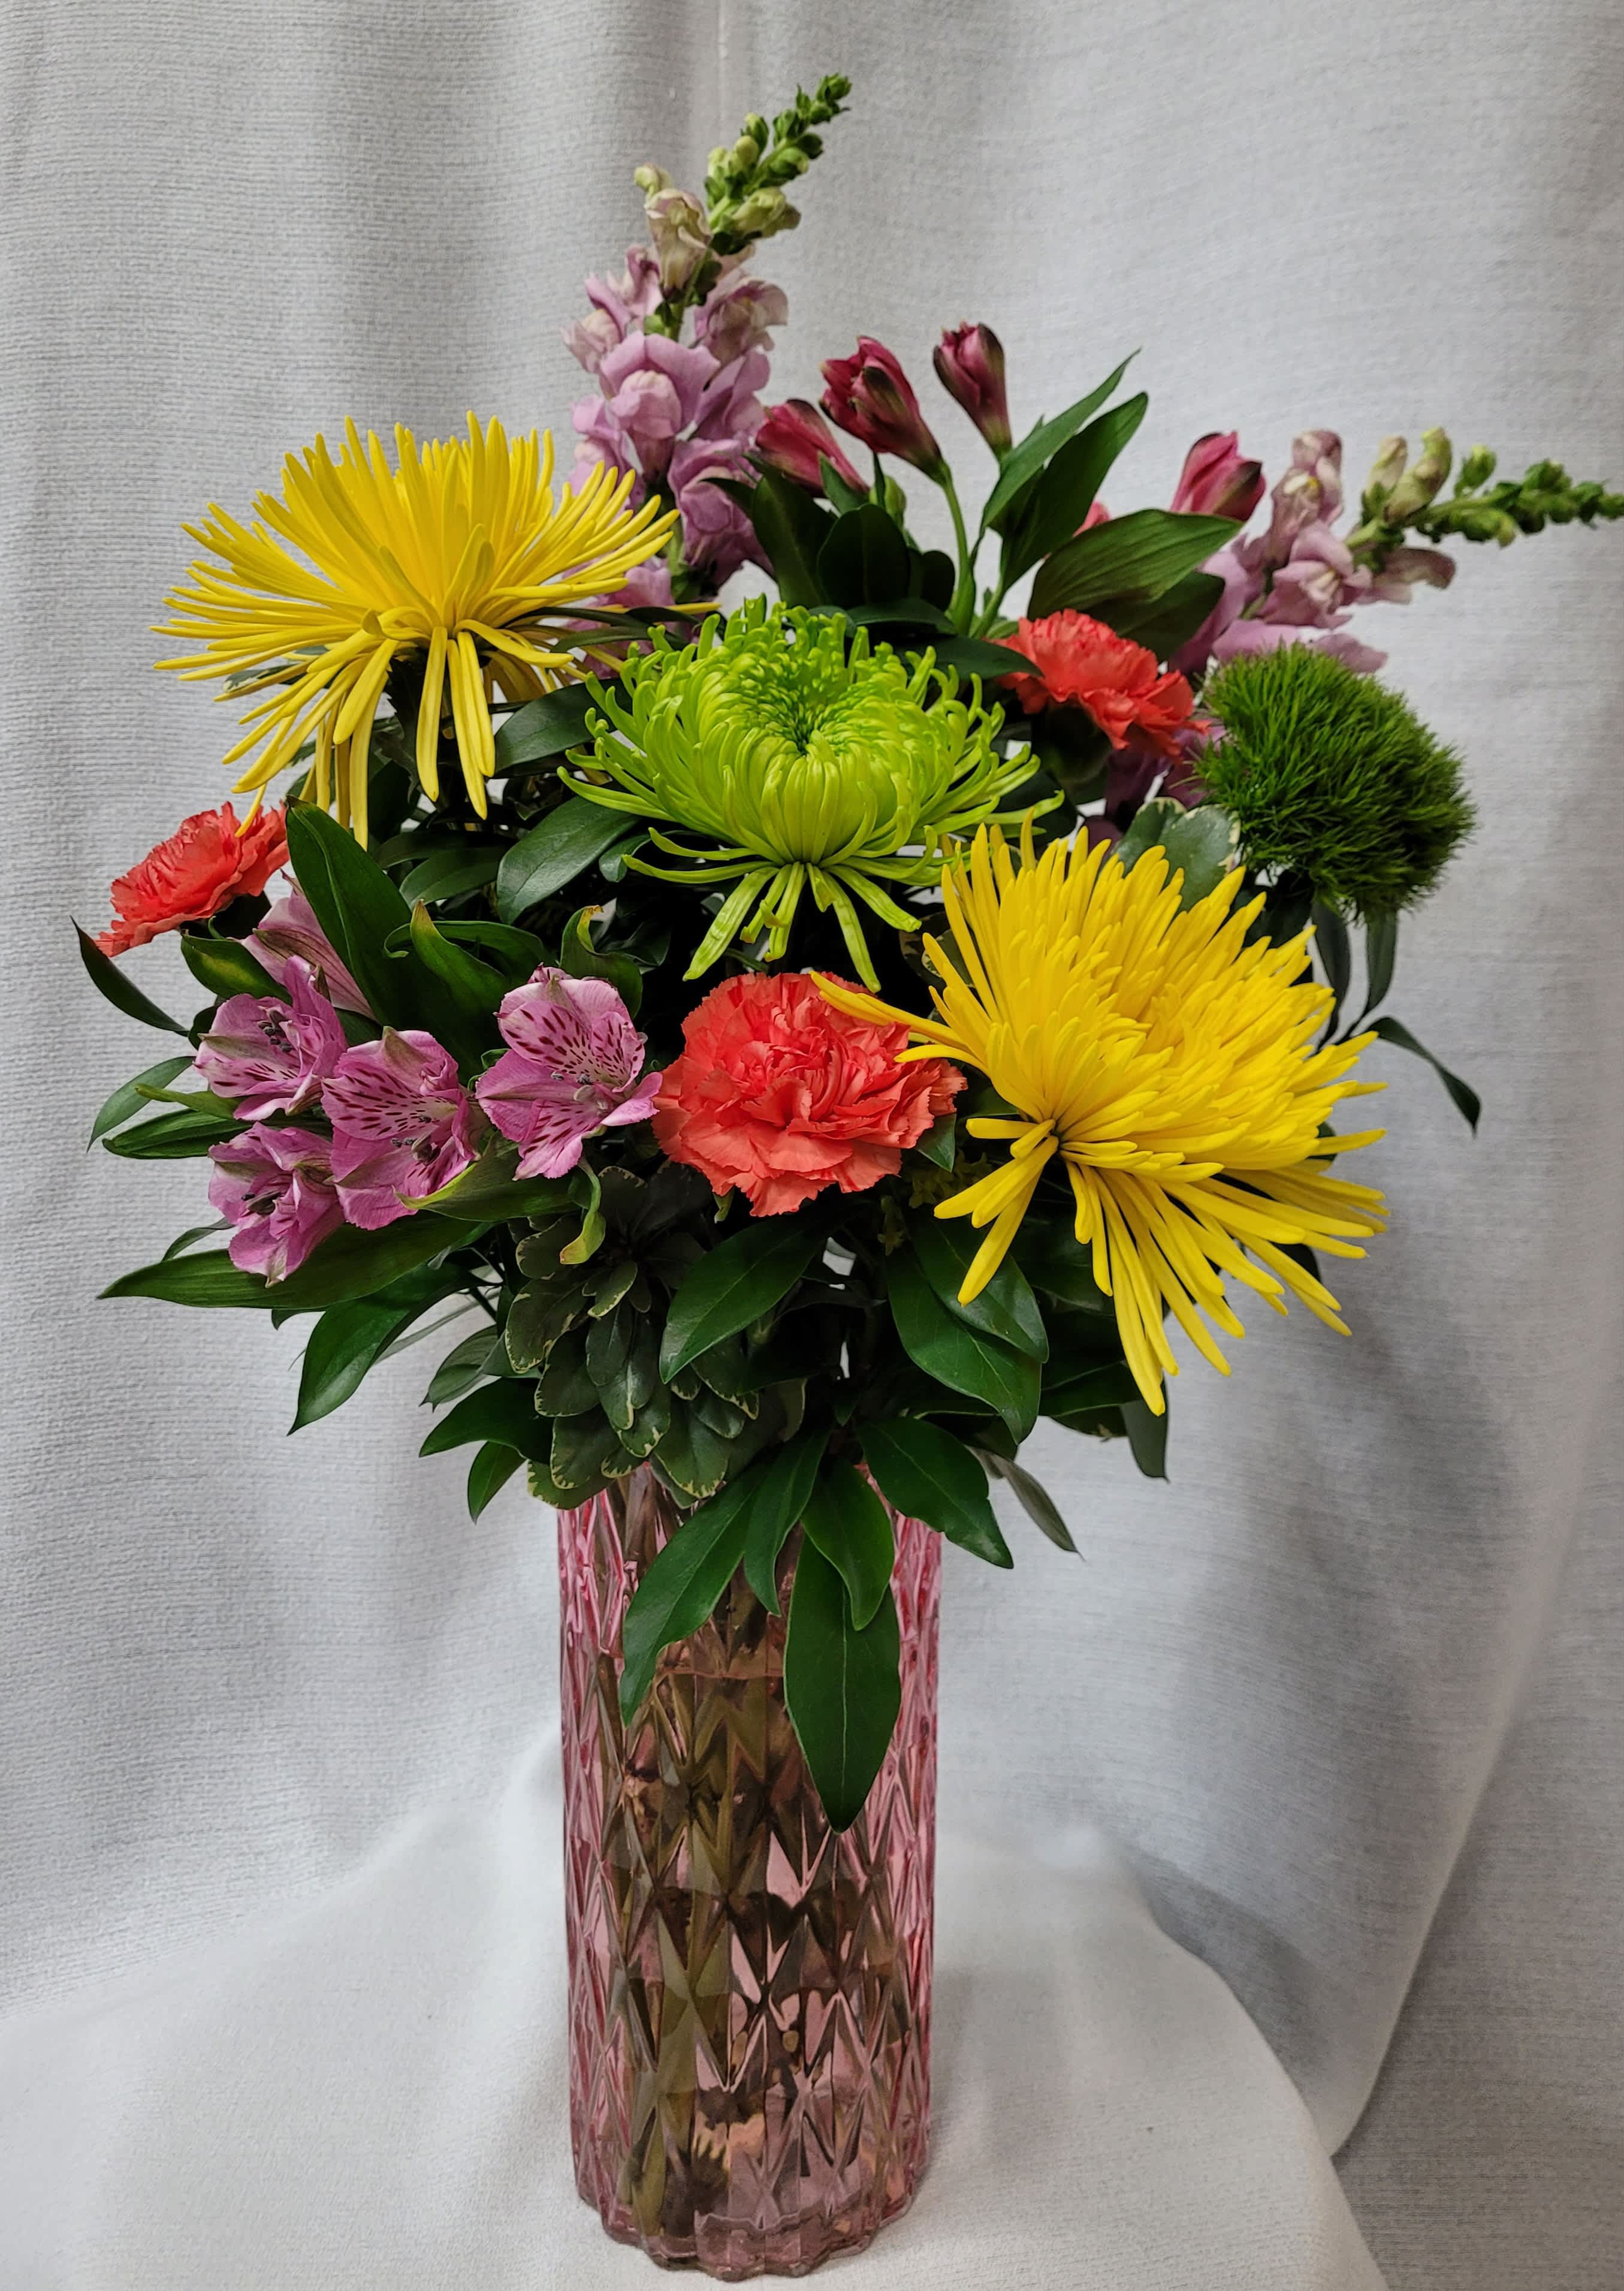 Happy Day - A tall cut pink vase filled with carnations, mums, dianthus, snap dragons, and alstromeria.